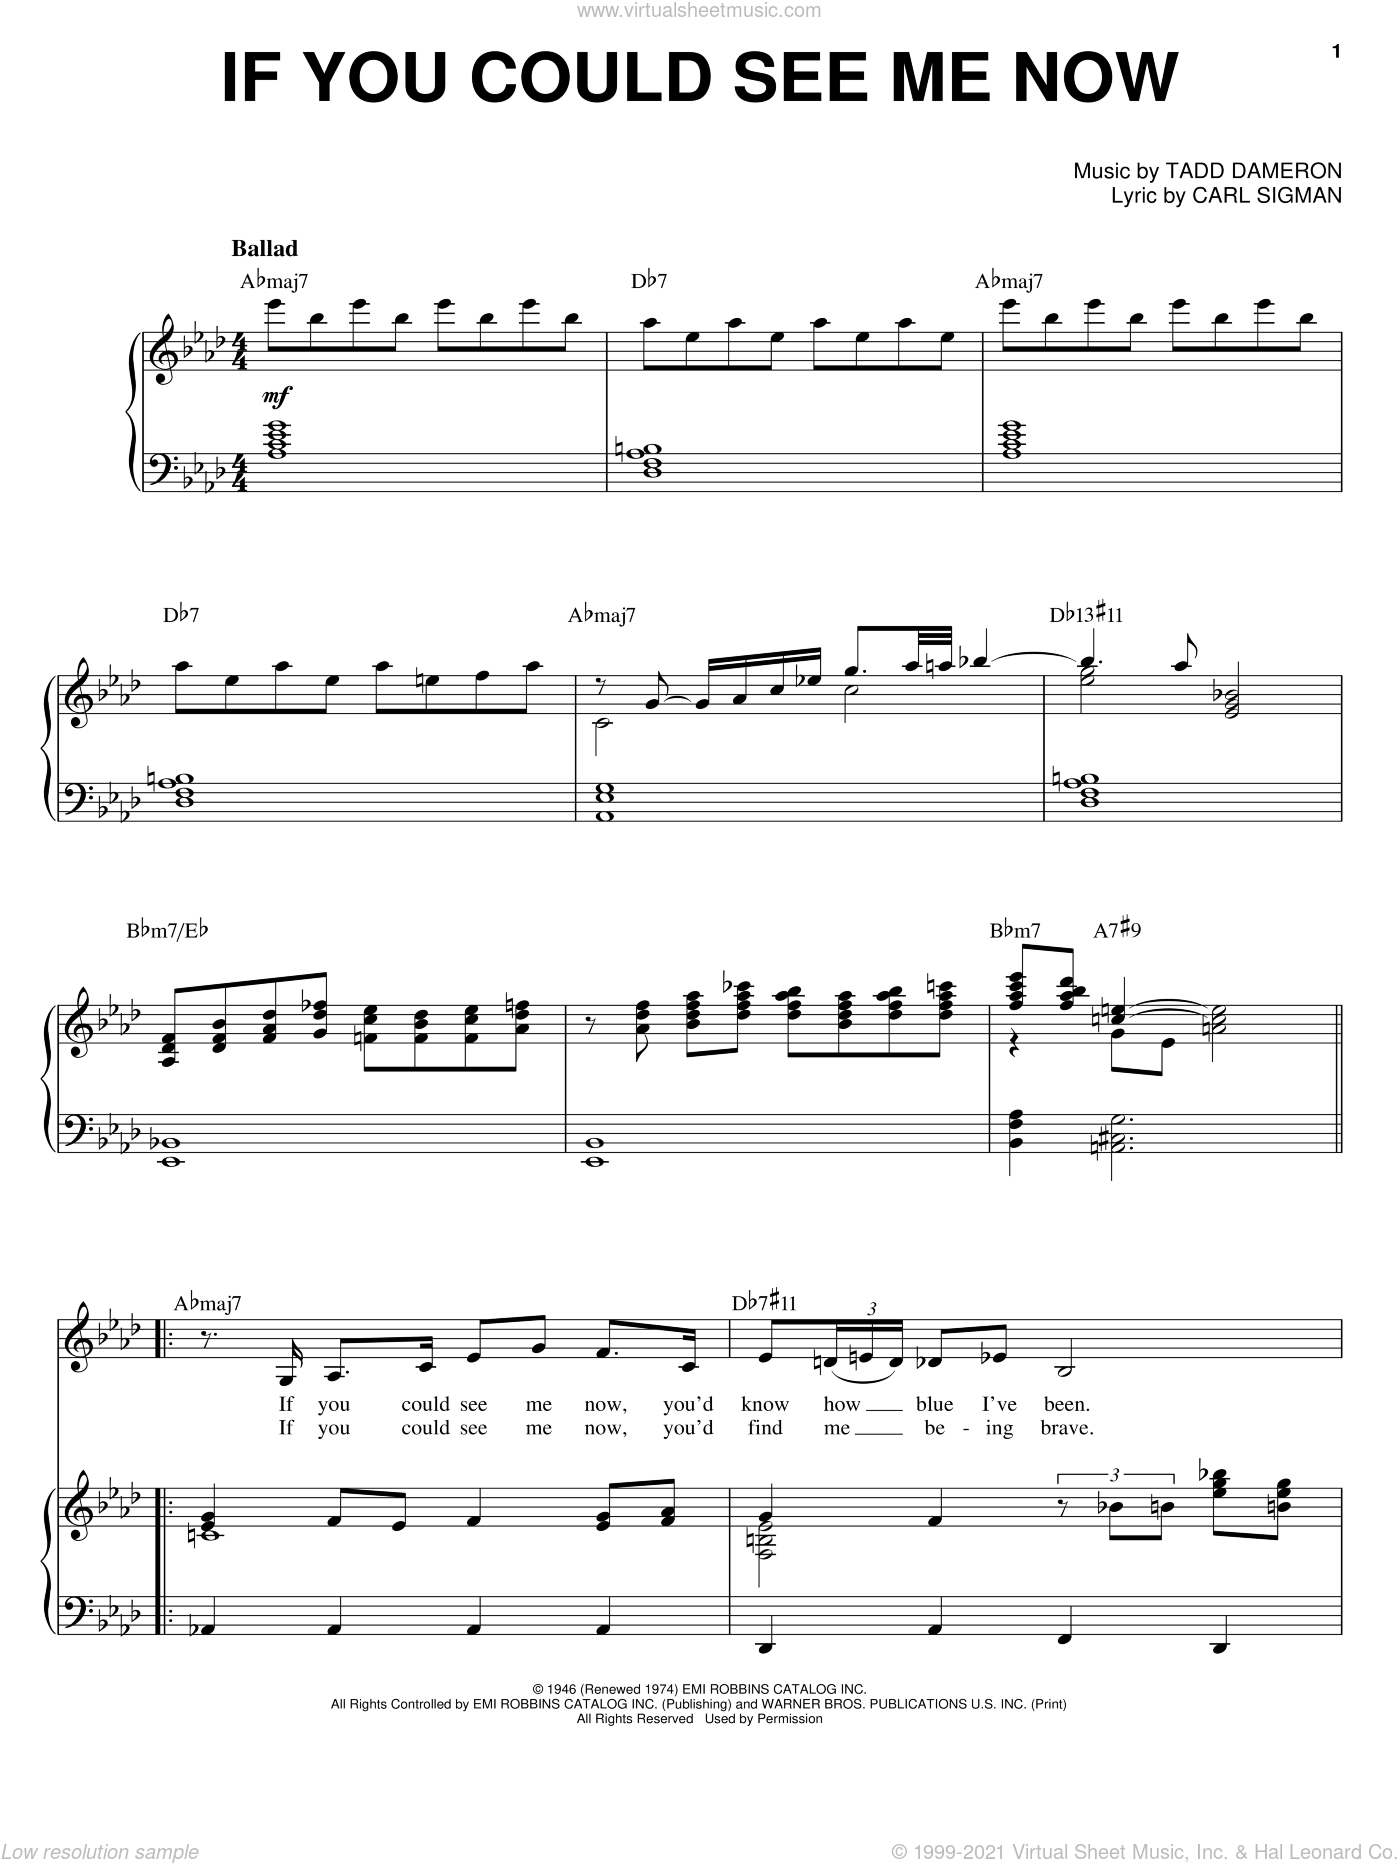 Cherokee Sarah Vaughan Ноты. Anyone can see l Love you scores pdf. The script if you could